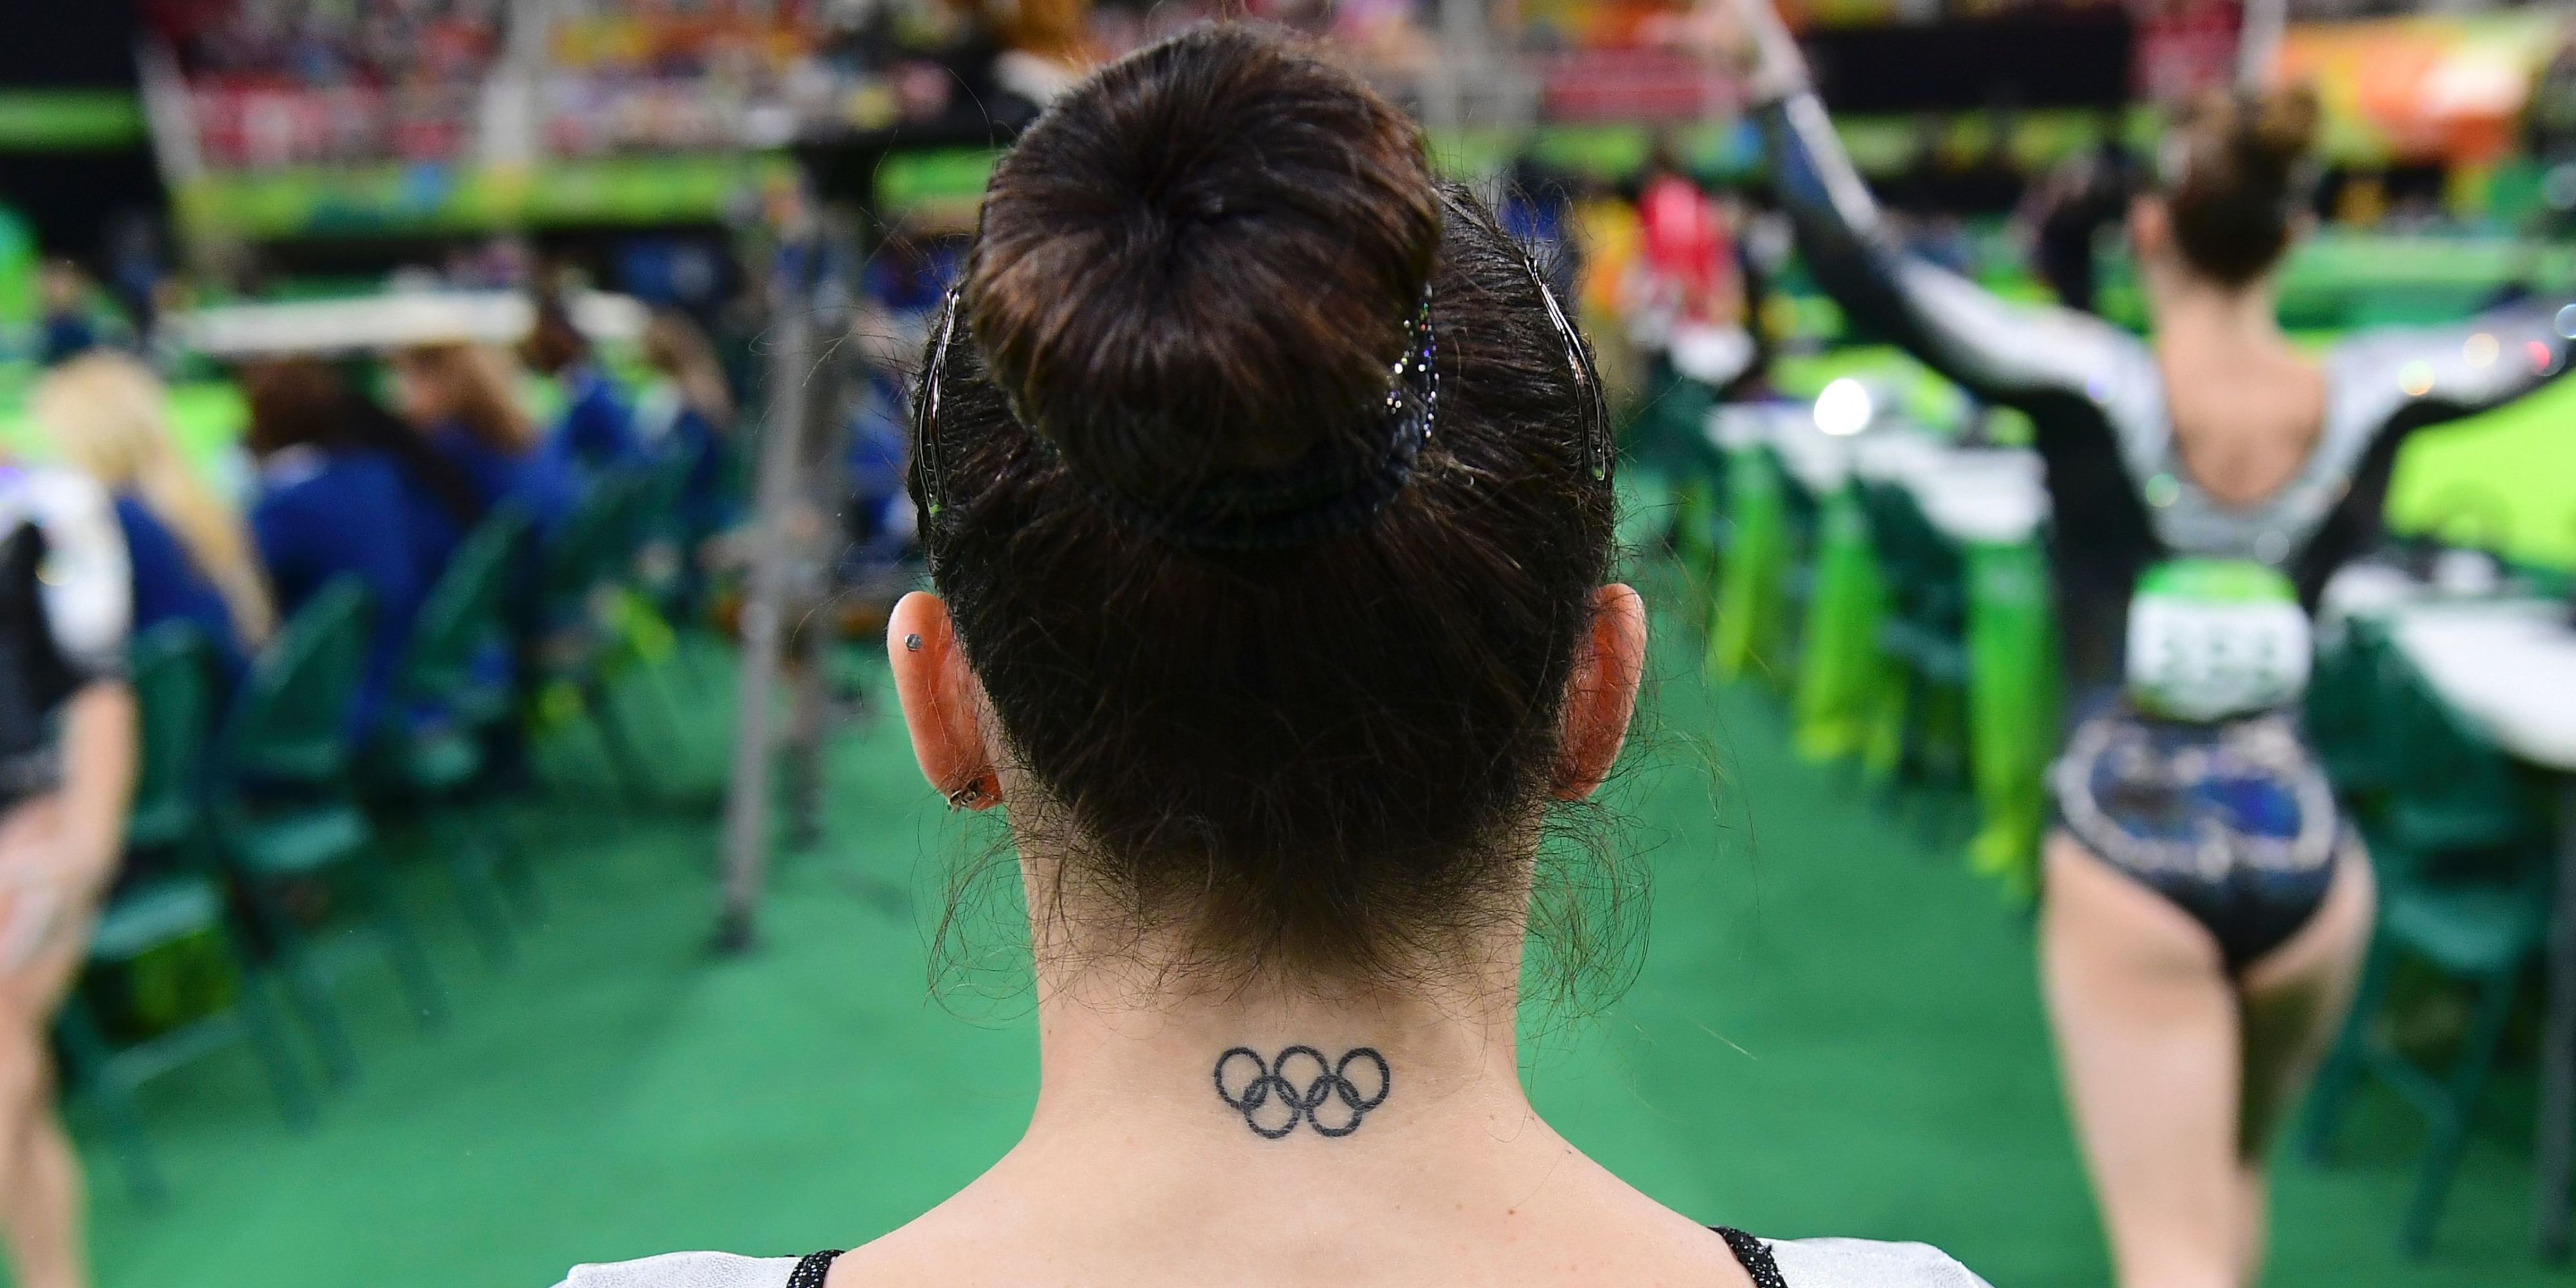 Olympians' tattoos are out in full force in Tokyo, where the art form has a  complex history | CNN